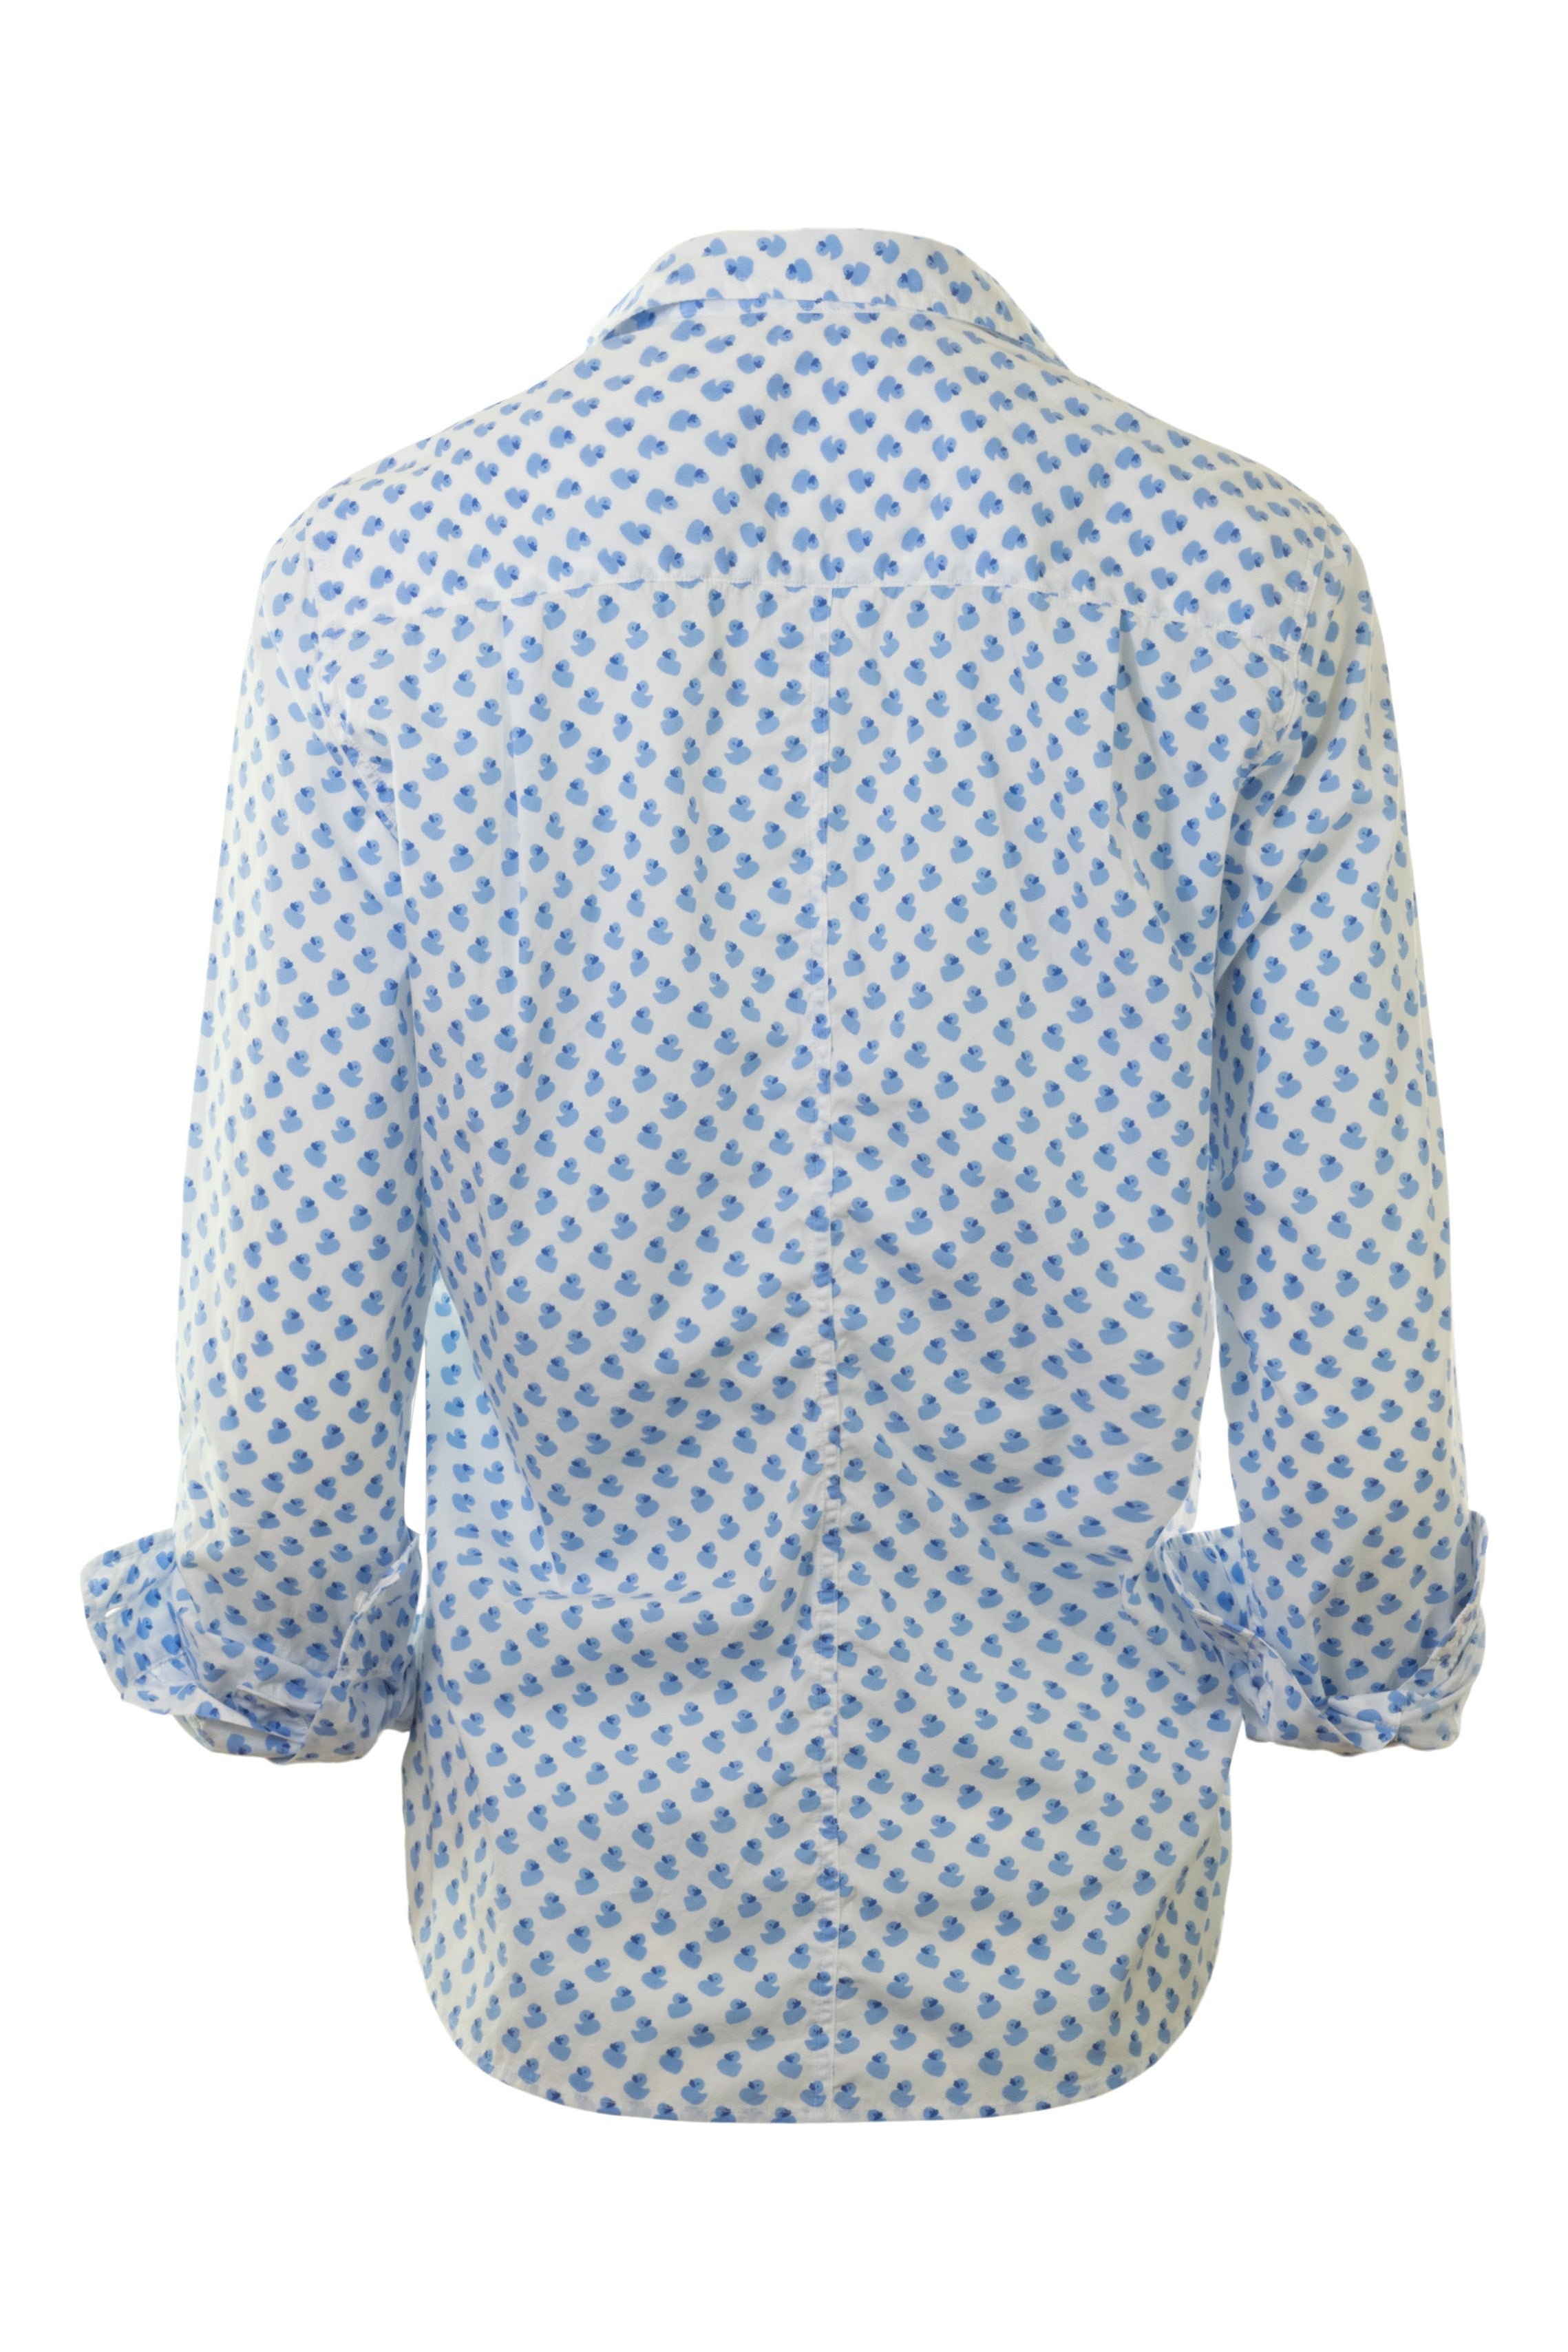 Frank & Eileen Barry Tailored Button Up Shirt in Blue Rubber Duckies